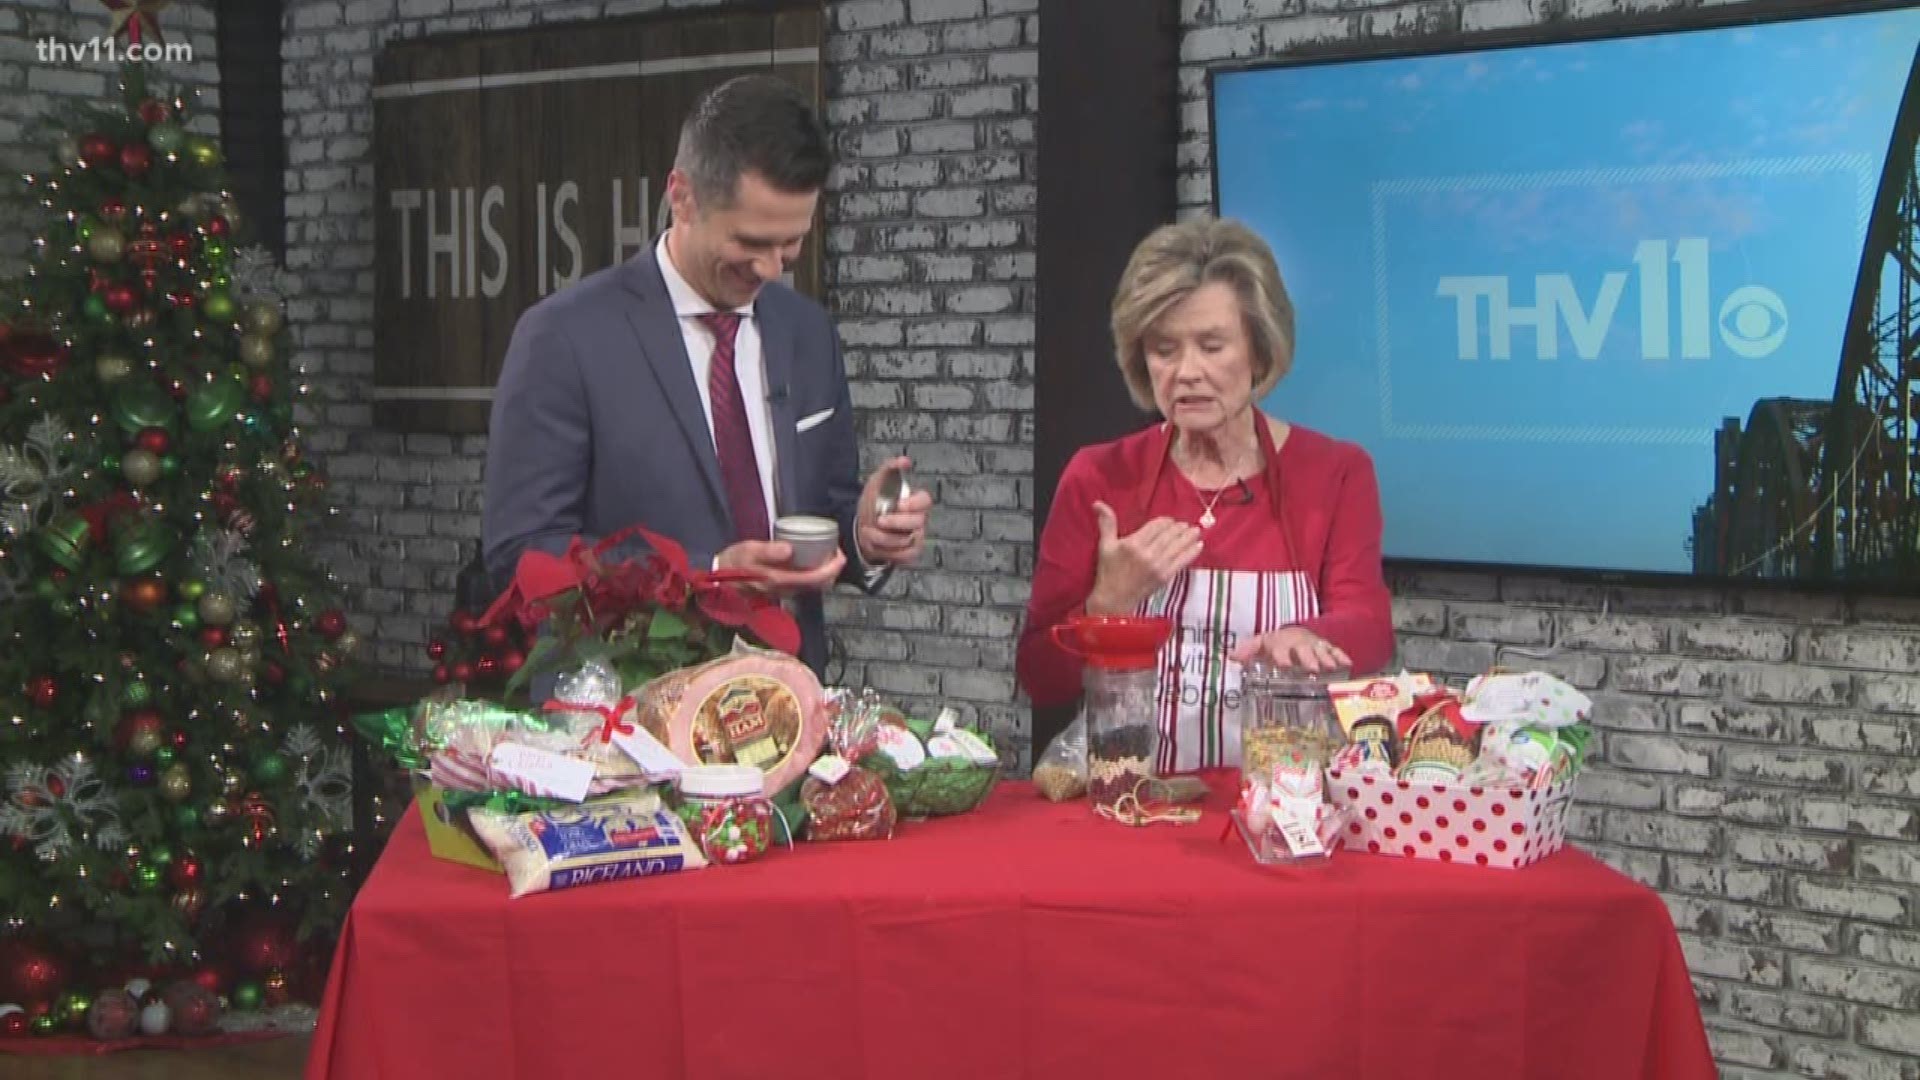 Debbie Arnold shows us how you can give gifts that are Arkansas made!